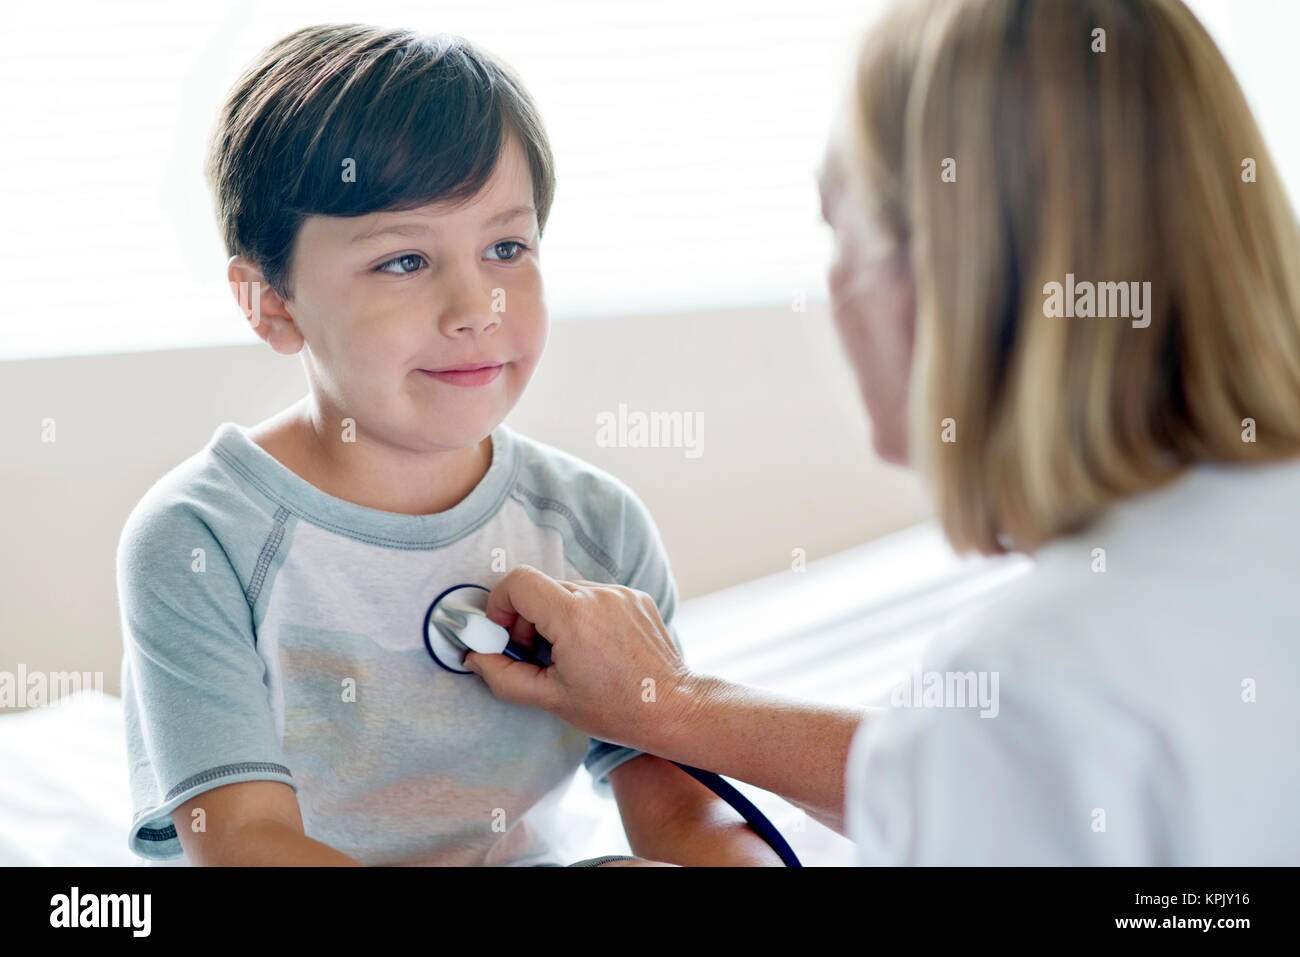 Young boy looking towards nurse with stethoscope. Stock Photo